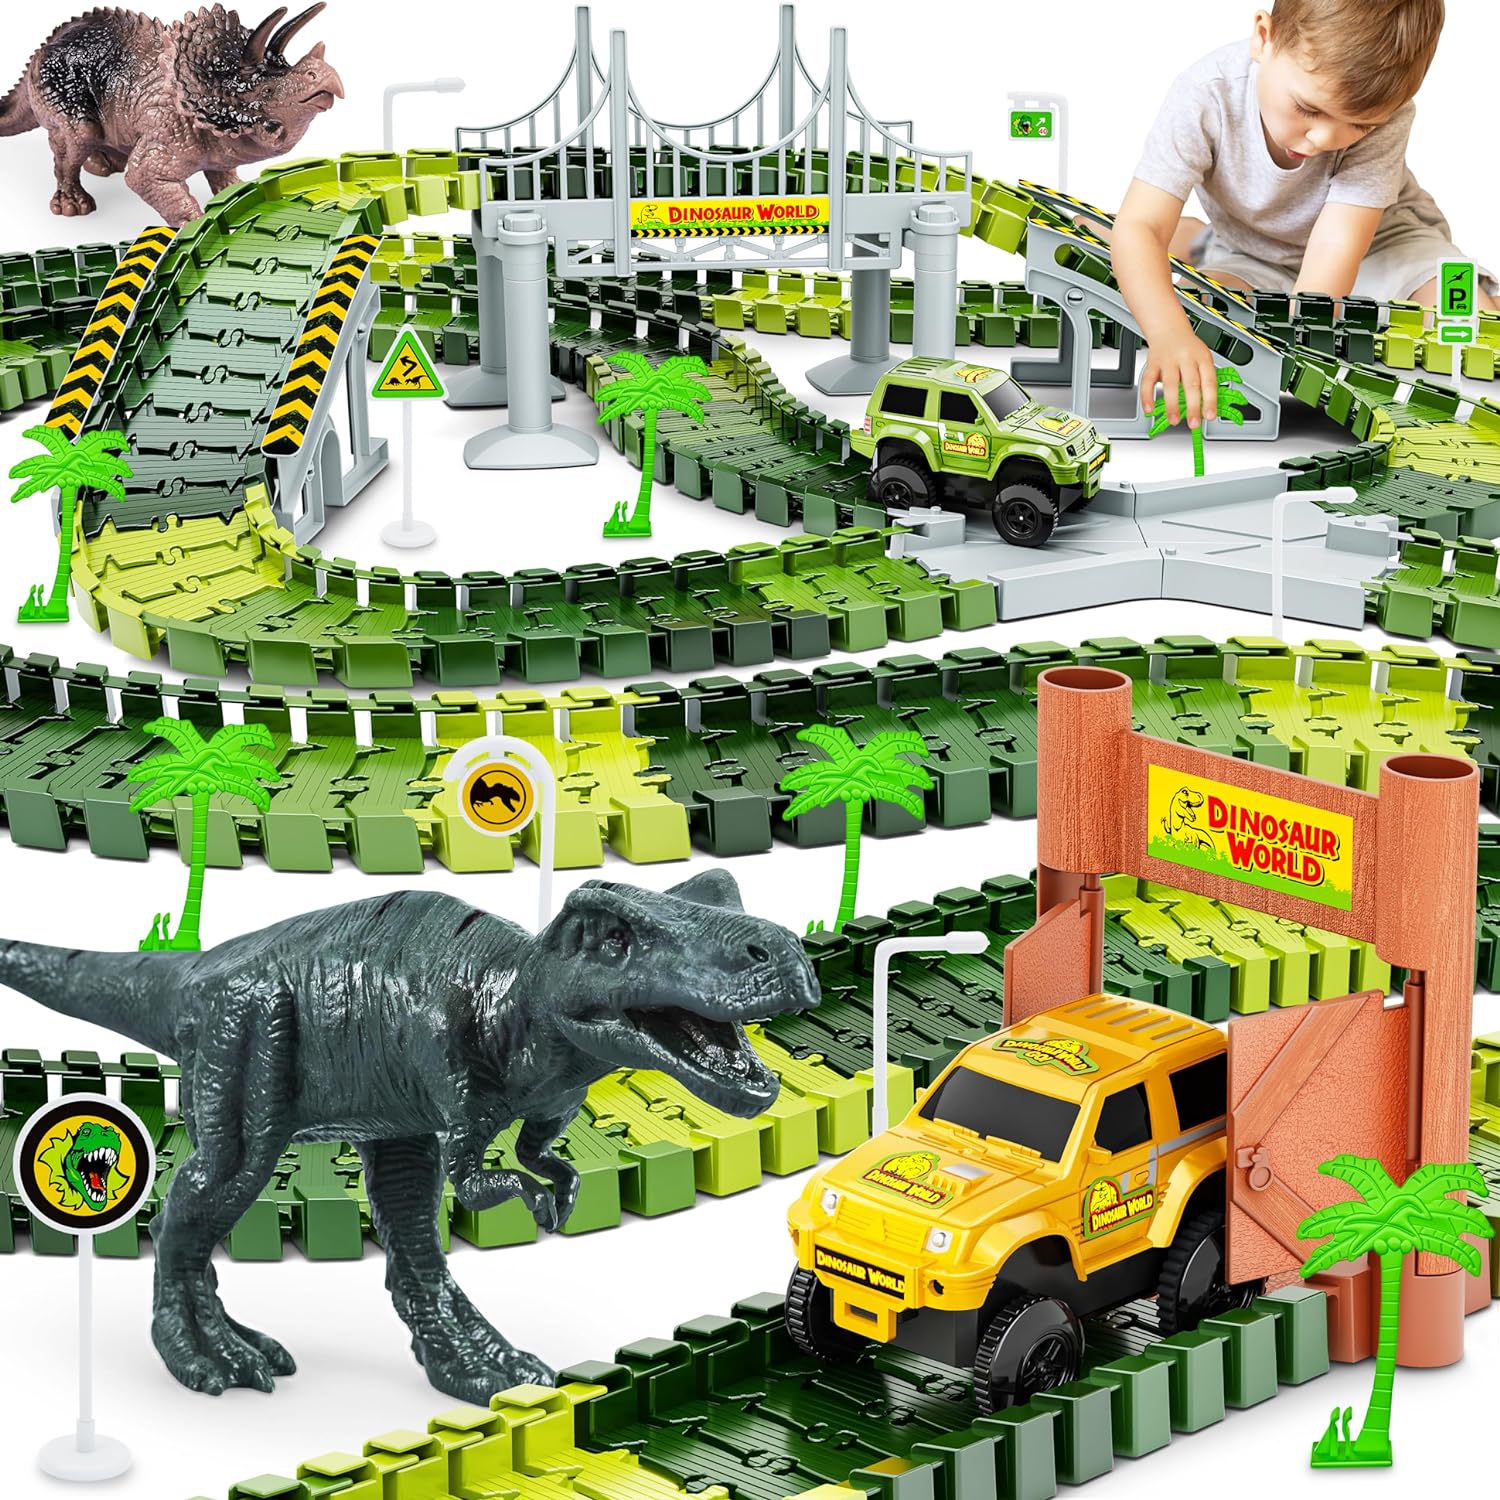 AOKESI Tracks, 271 PCS Create A Dinosaur World Road Race for Kids Boys Toys Flexible Train Tracks Set with 2 Cool Race Cars and 2 Dinosaur Toys for Age 3 4 5 6 7 8 Year & Up Old Boy Girls Best Gift